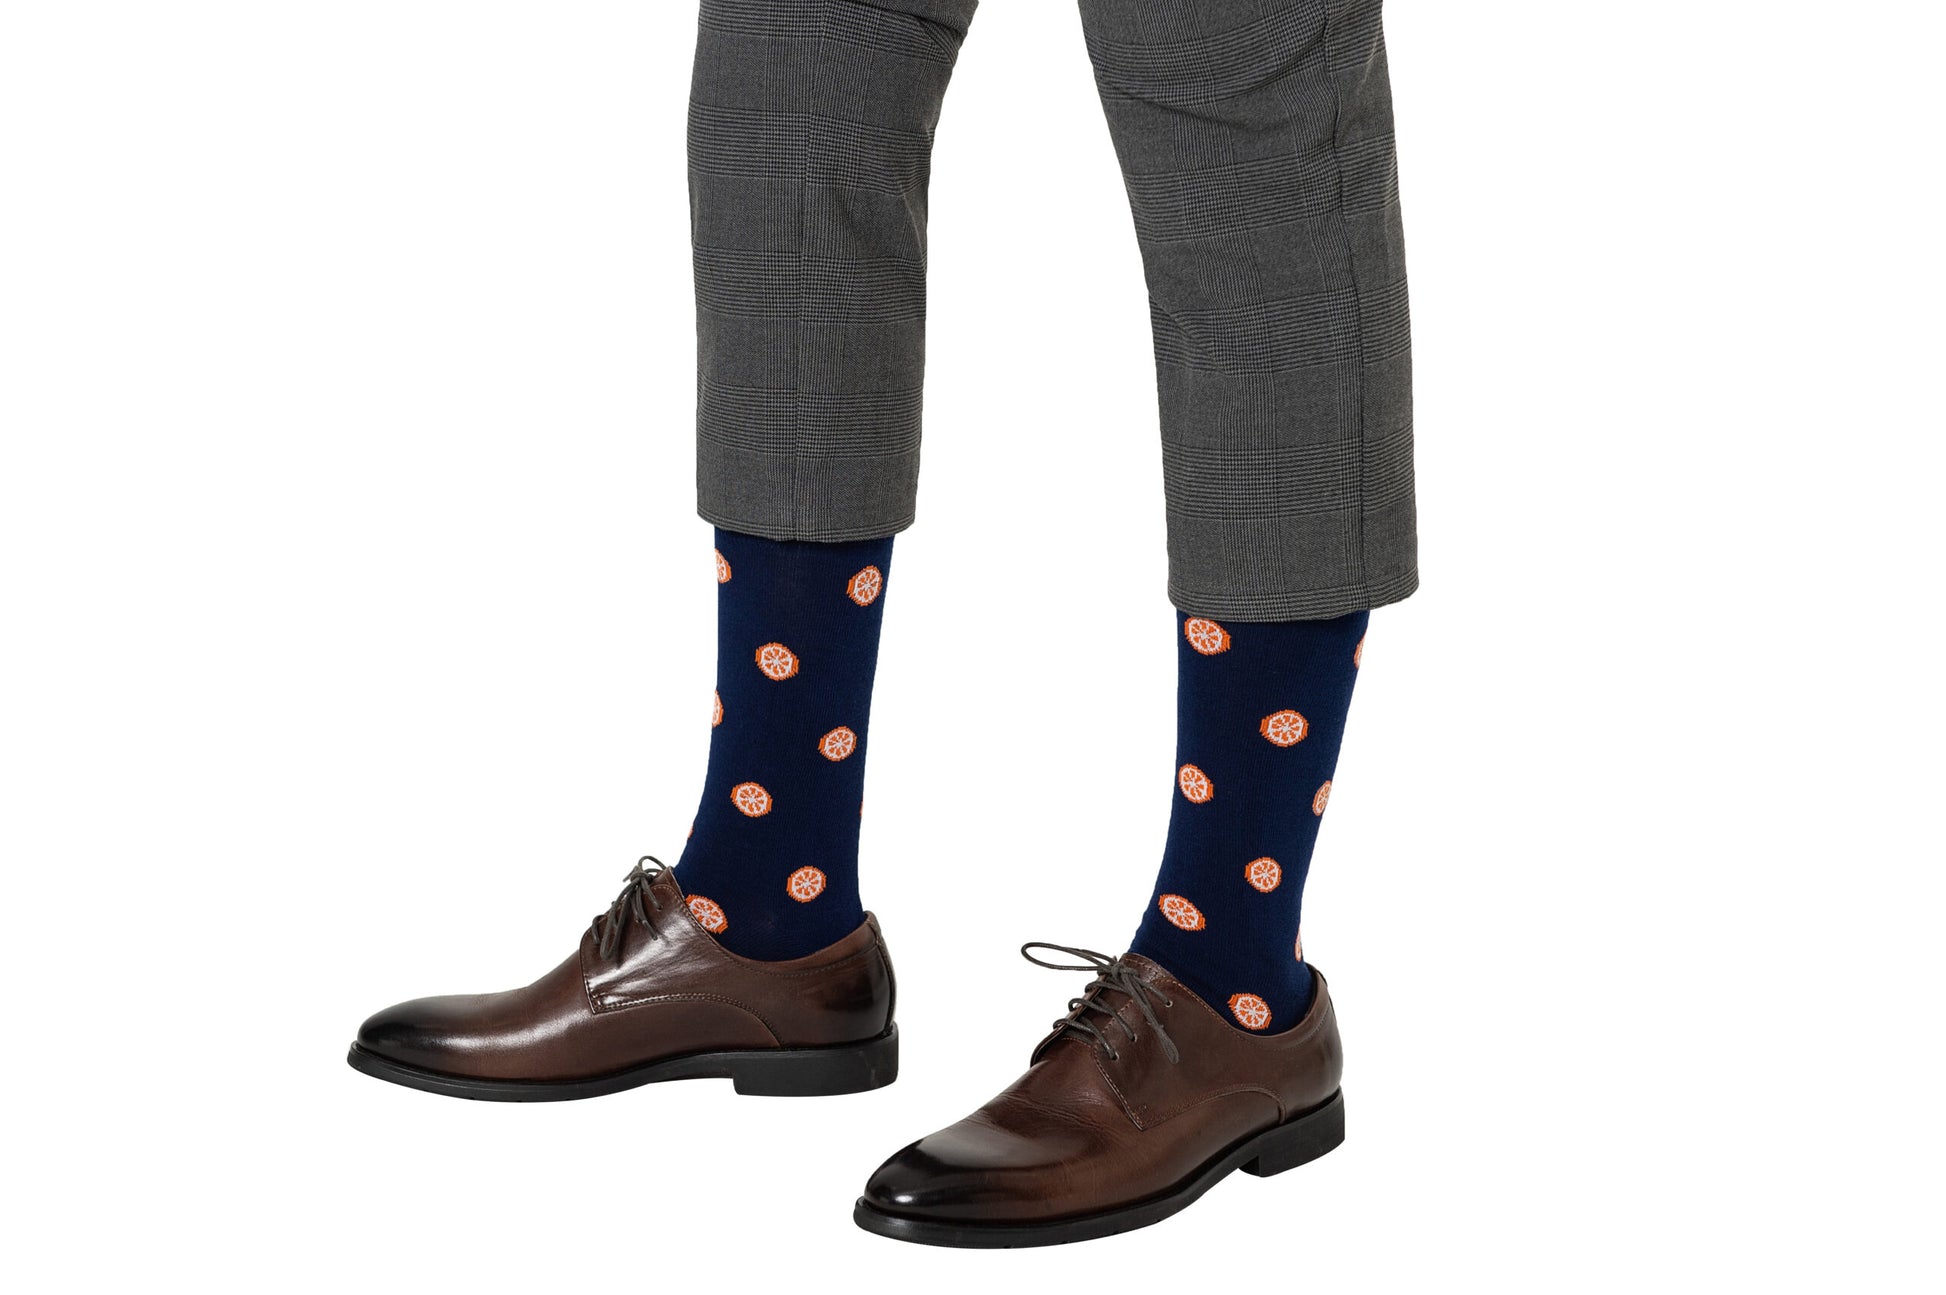 A person showcasing citrusy comfort, wearing brown dress shoes and orange socks with orange coin-pattern details, paired with grey trousers.